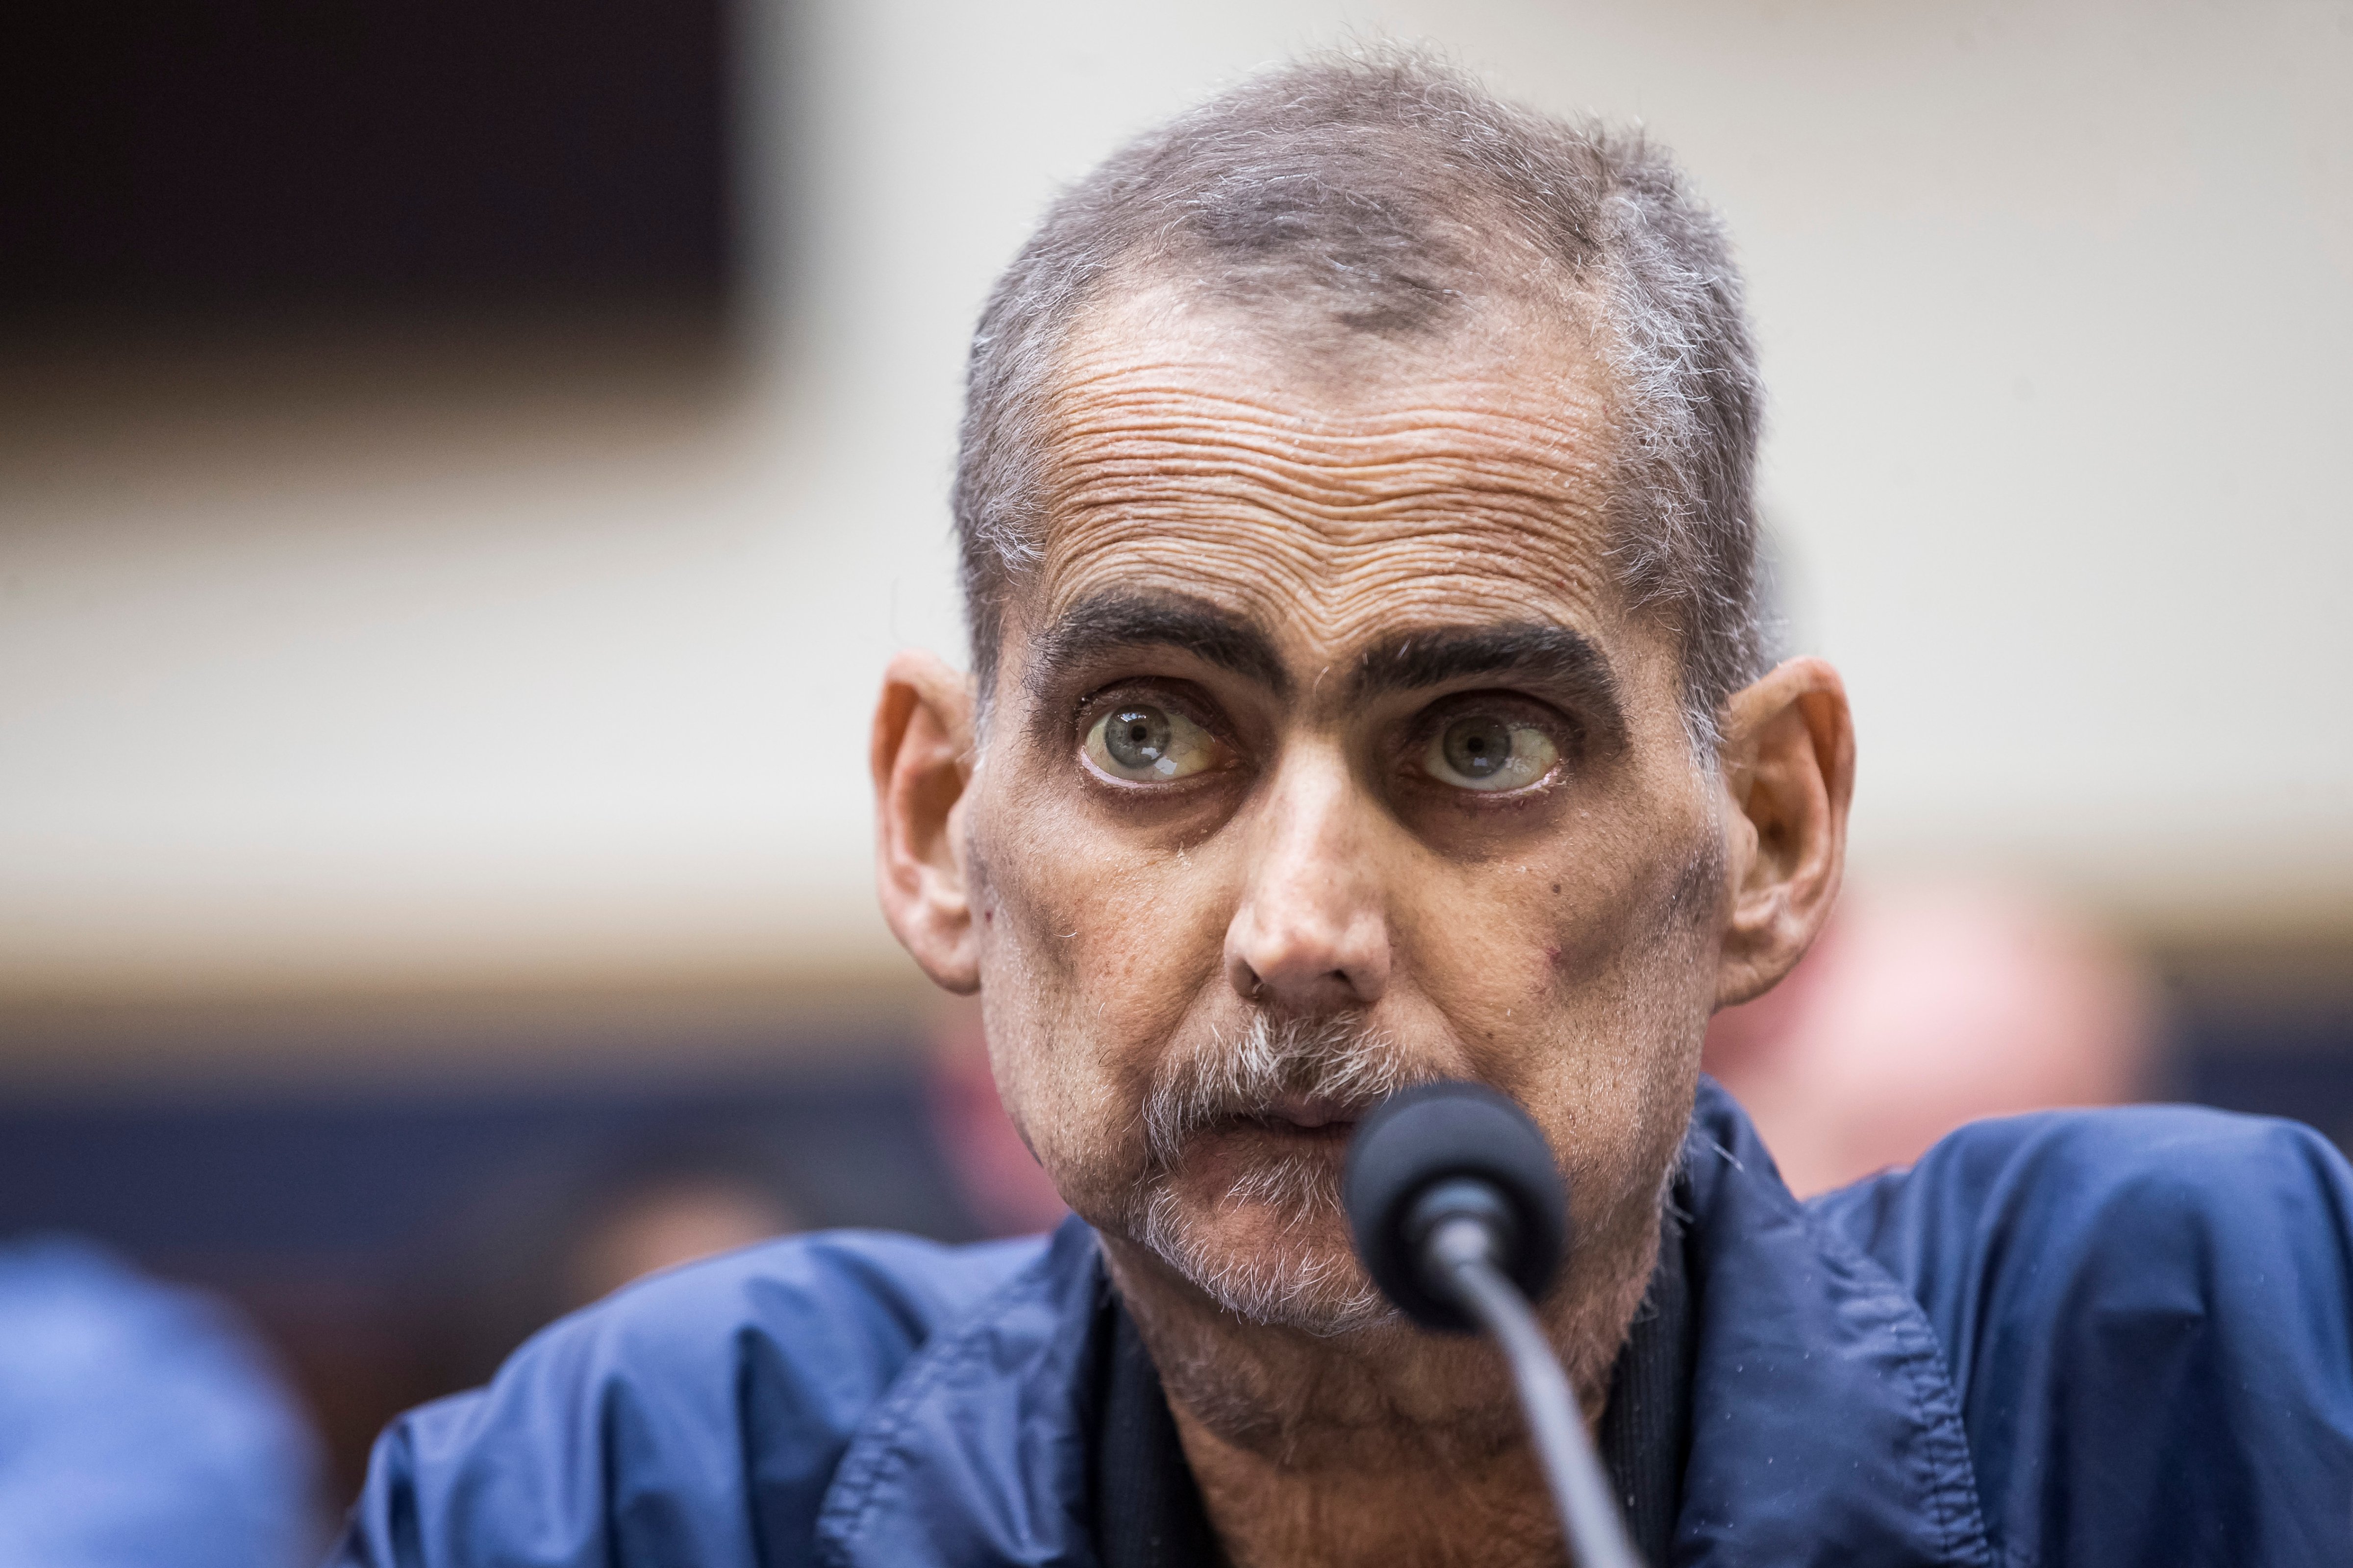 Retired New York Police Department detective and 9/11 responder Luis Alvarez testifies during a House Judiciary Committee hearing on reauthorization of the September 11th Victim Compensation Fund on Capitol Hill on June 11, 2019 in Washington, DC. (Zach Gibson&mdash;Getty Images)